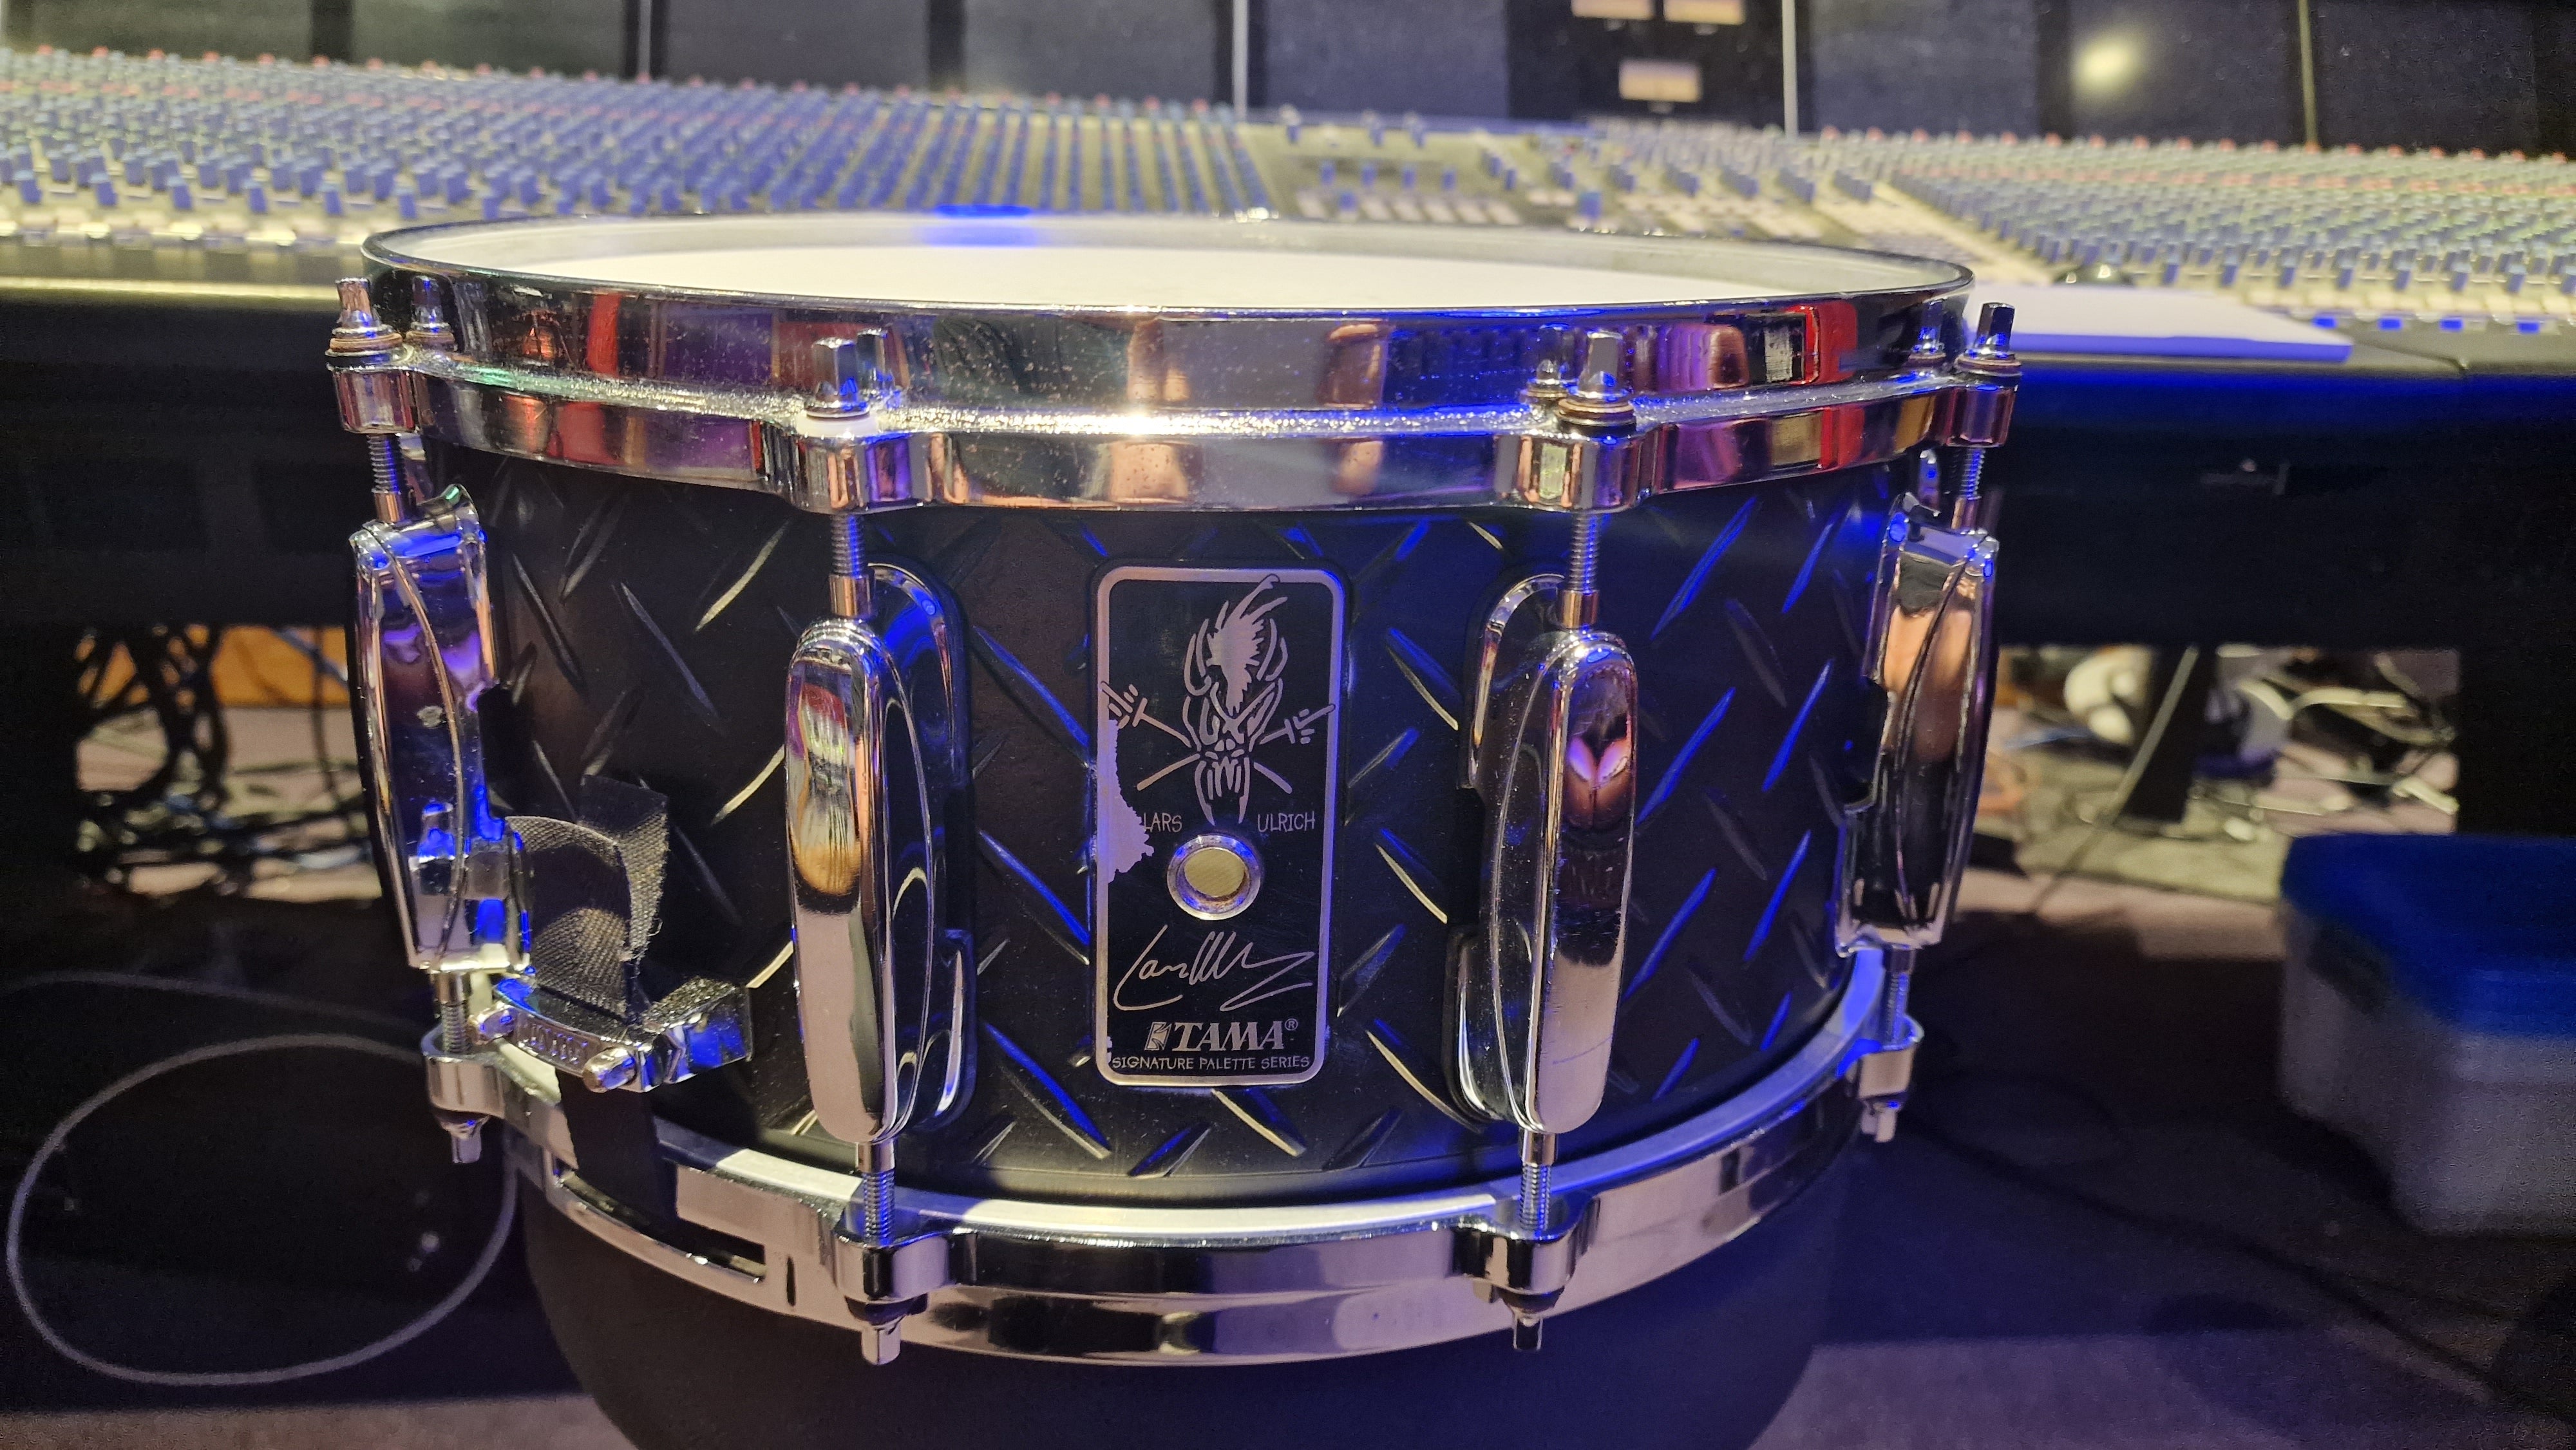 Tama Lars Ulrich LU1465 Limited Edition Metallica Signature Snare Drum Matte Black Signed by Lars!